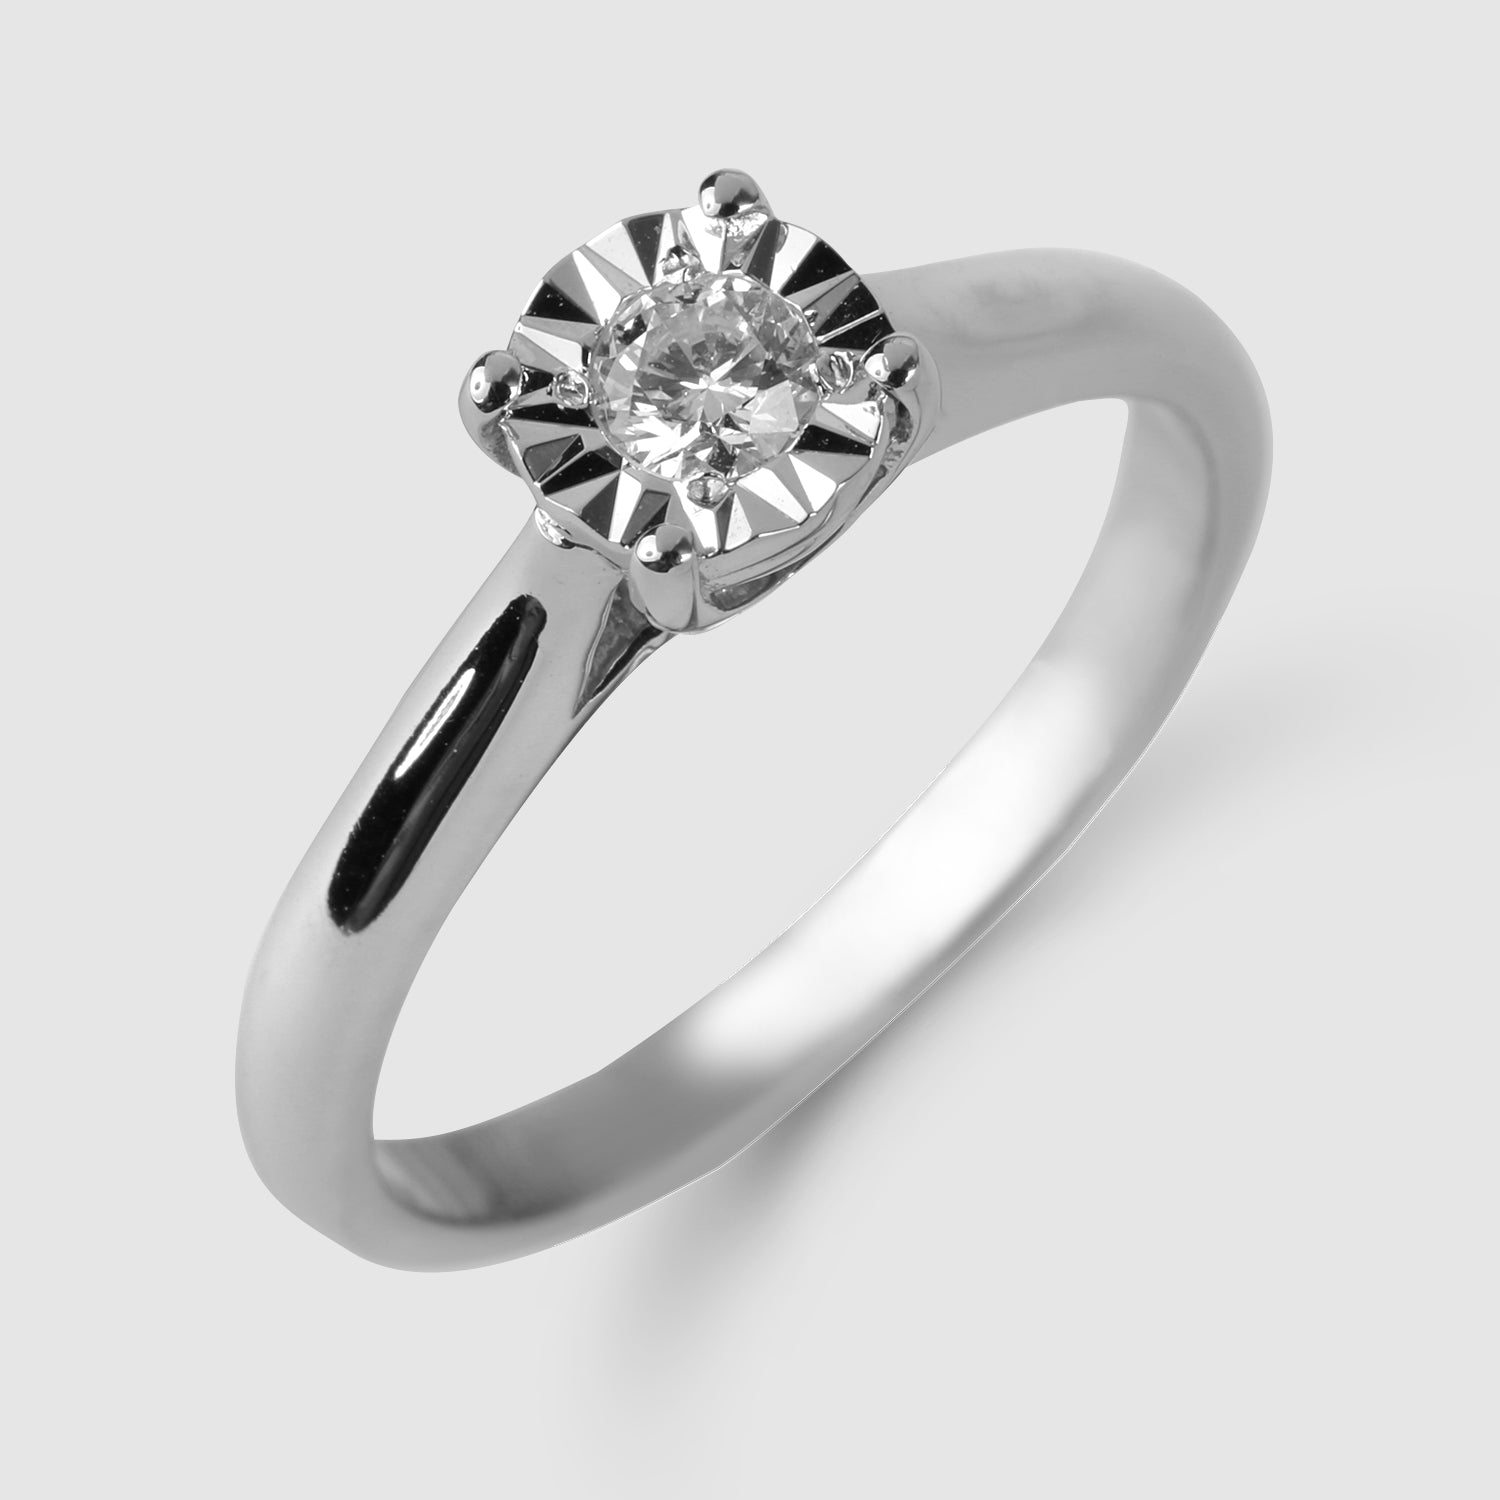 Ways To Purchase The Best Diamond Ring